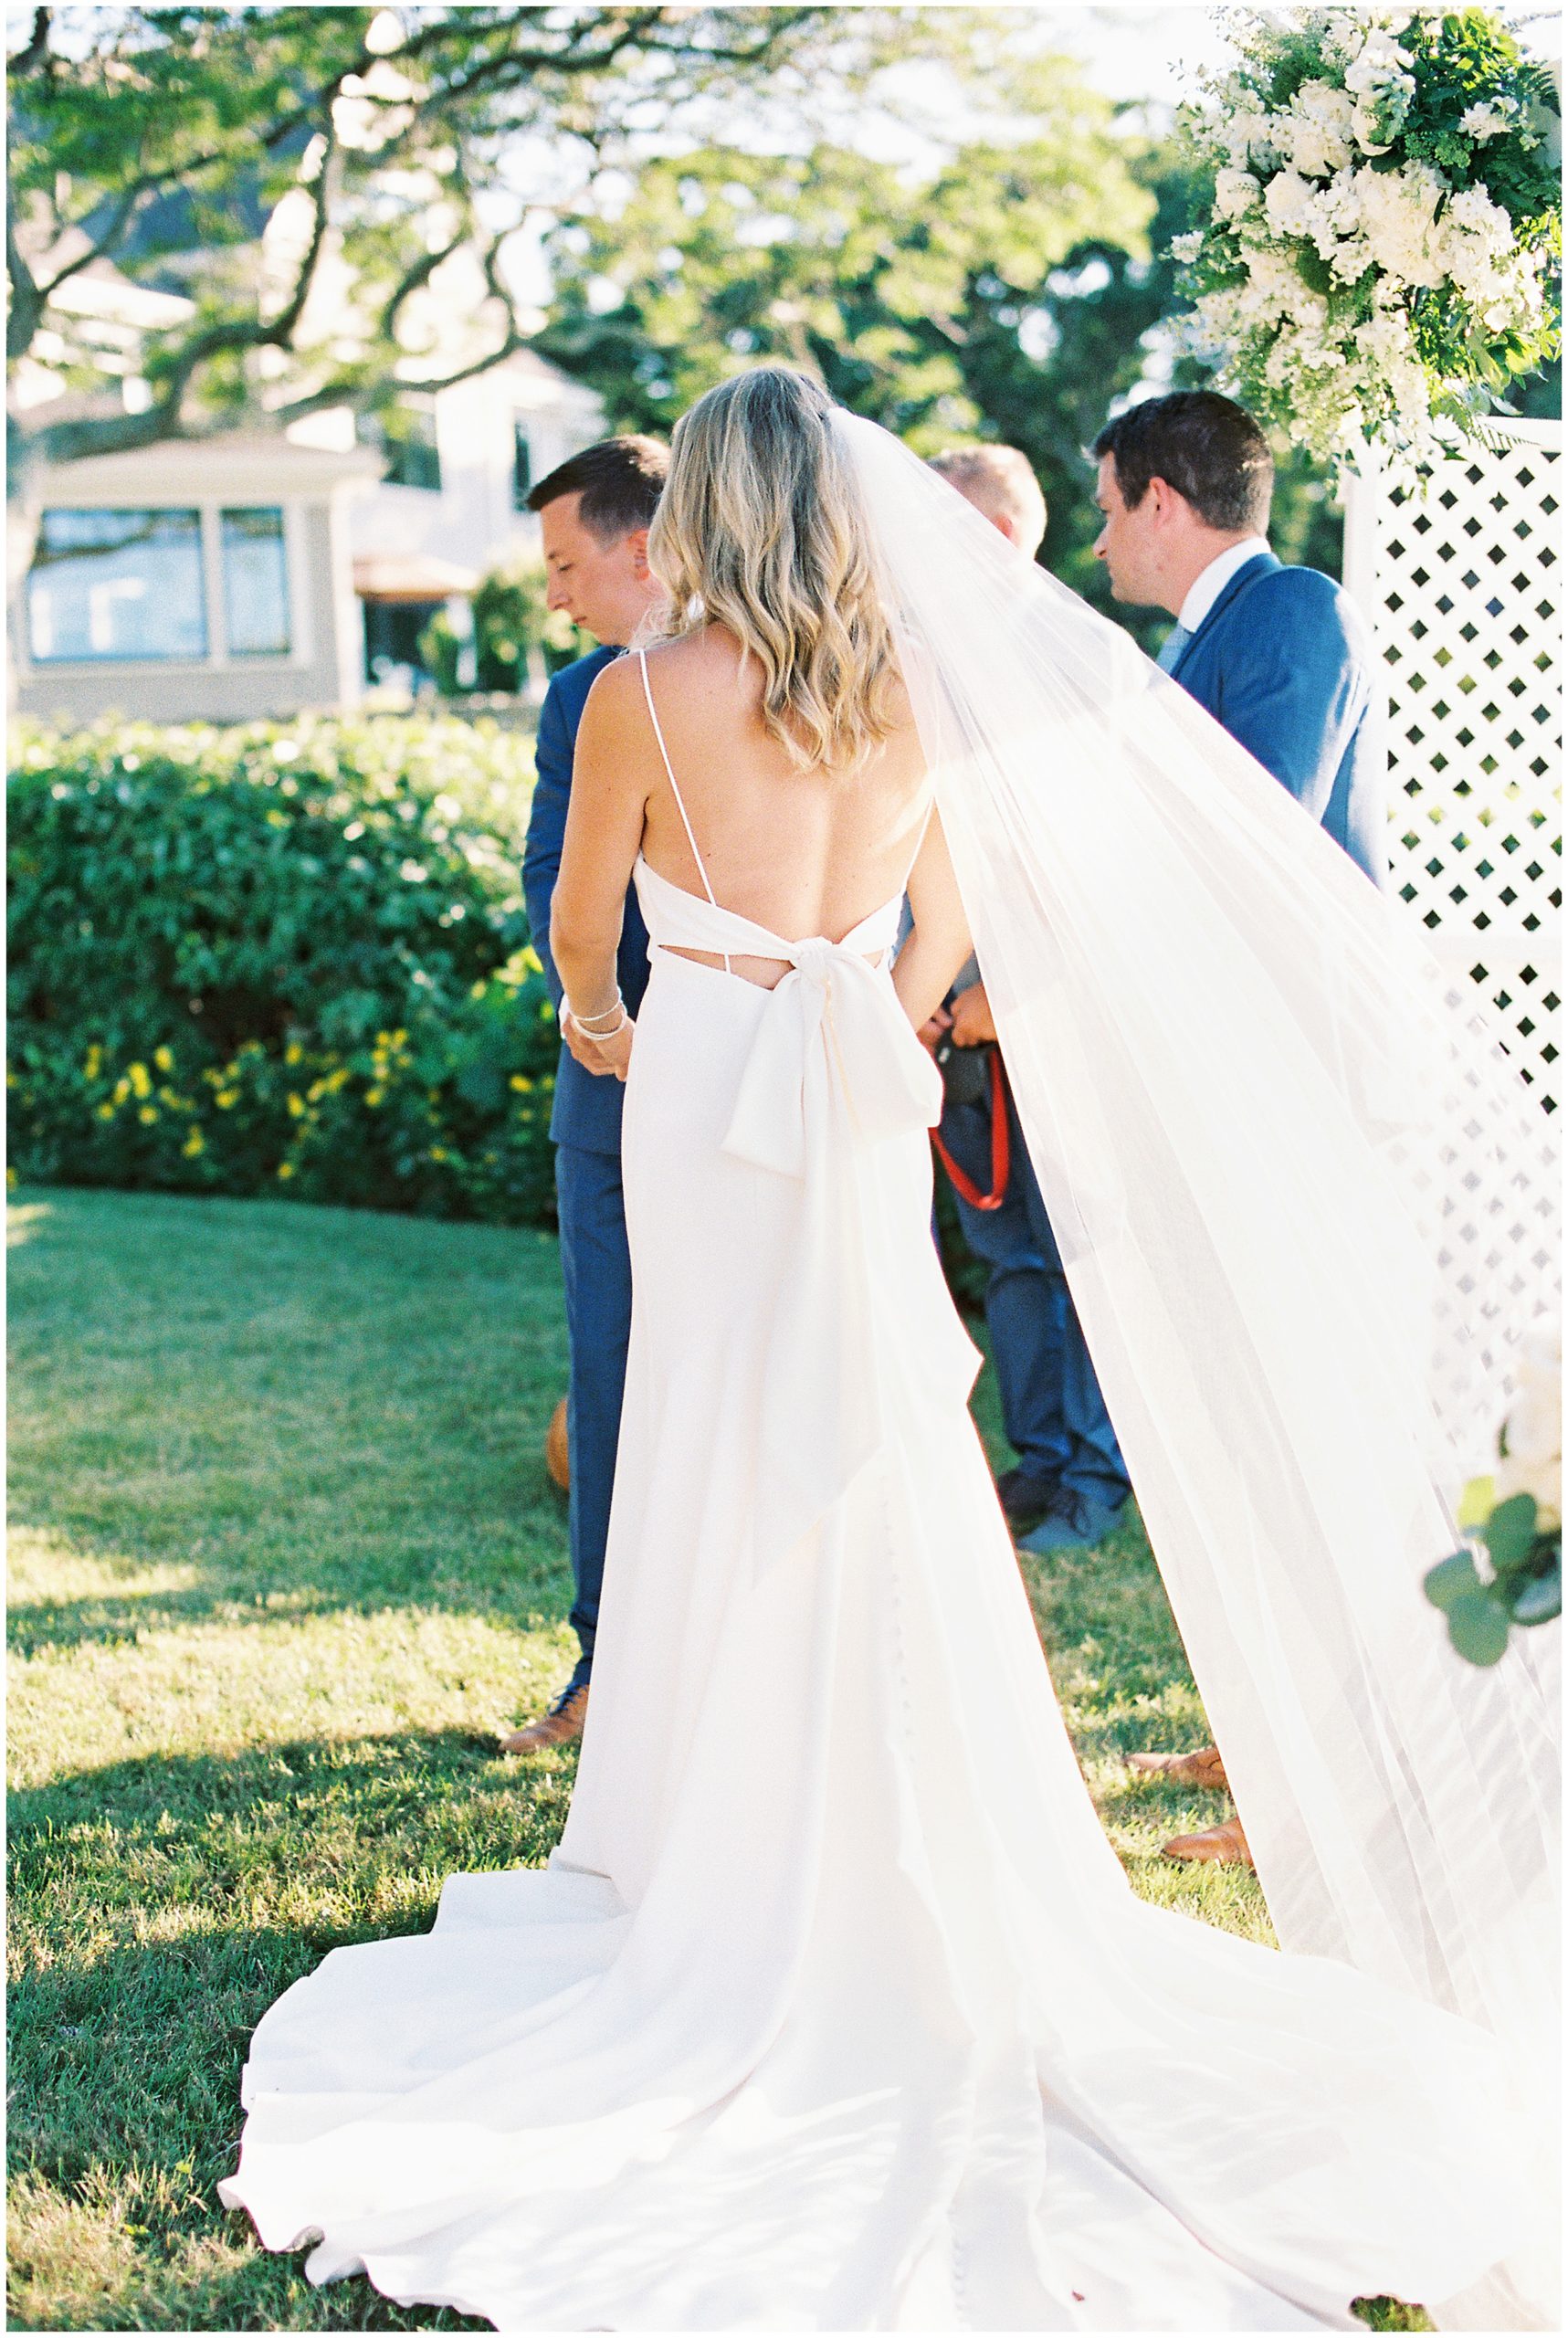 stunning bridal gown with low back and bow